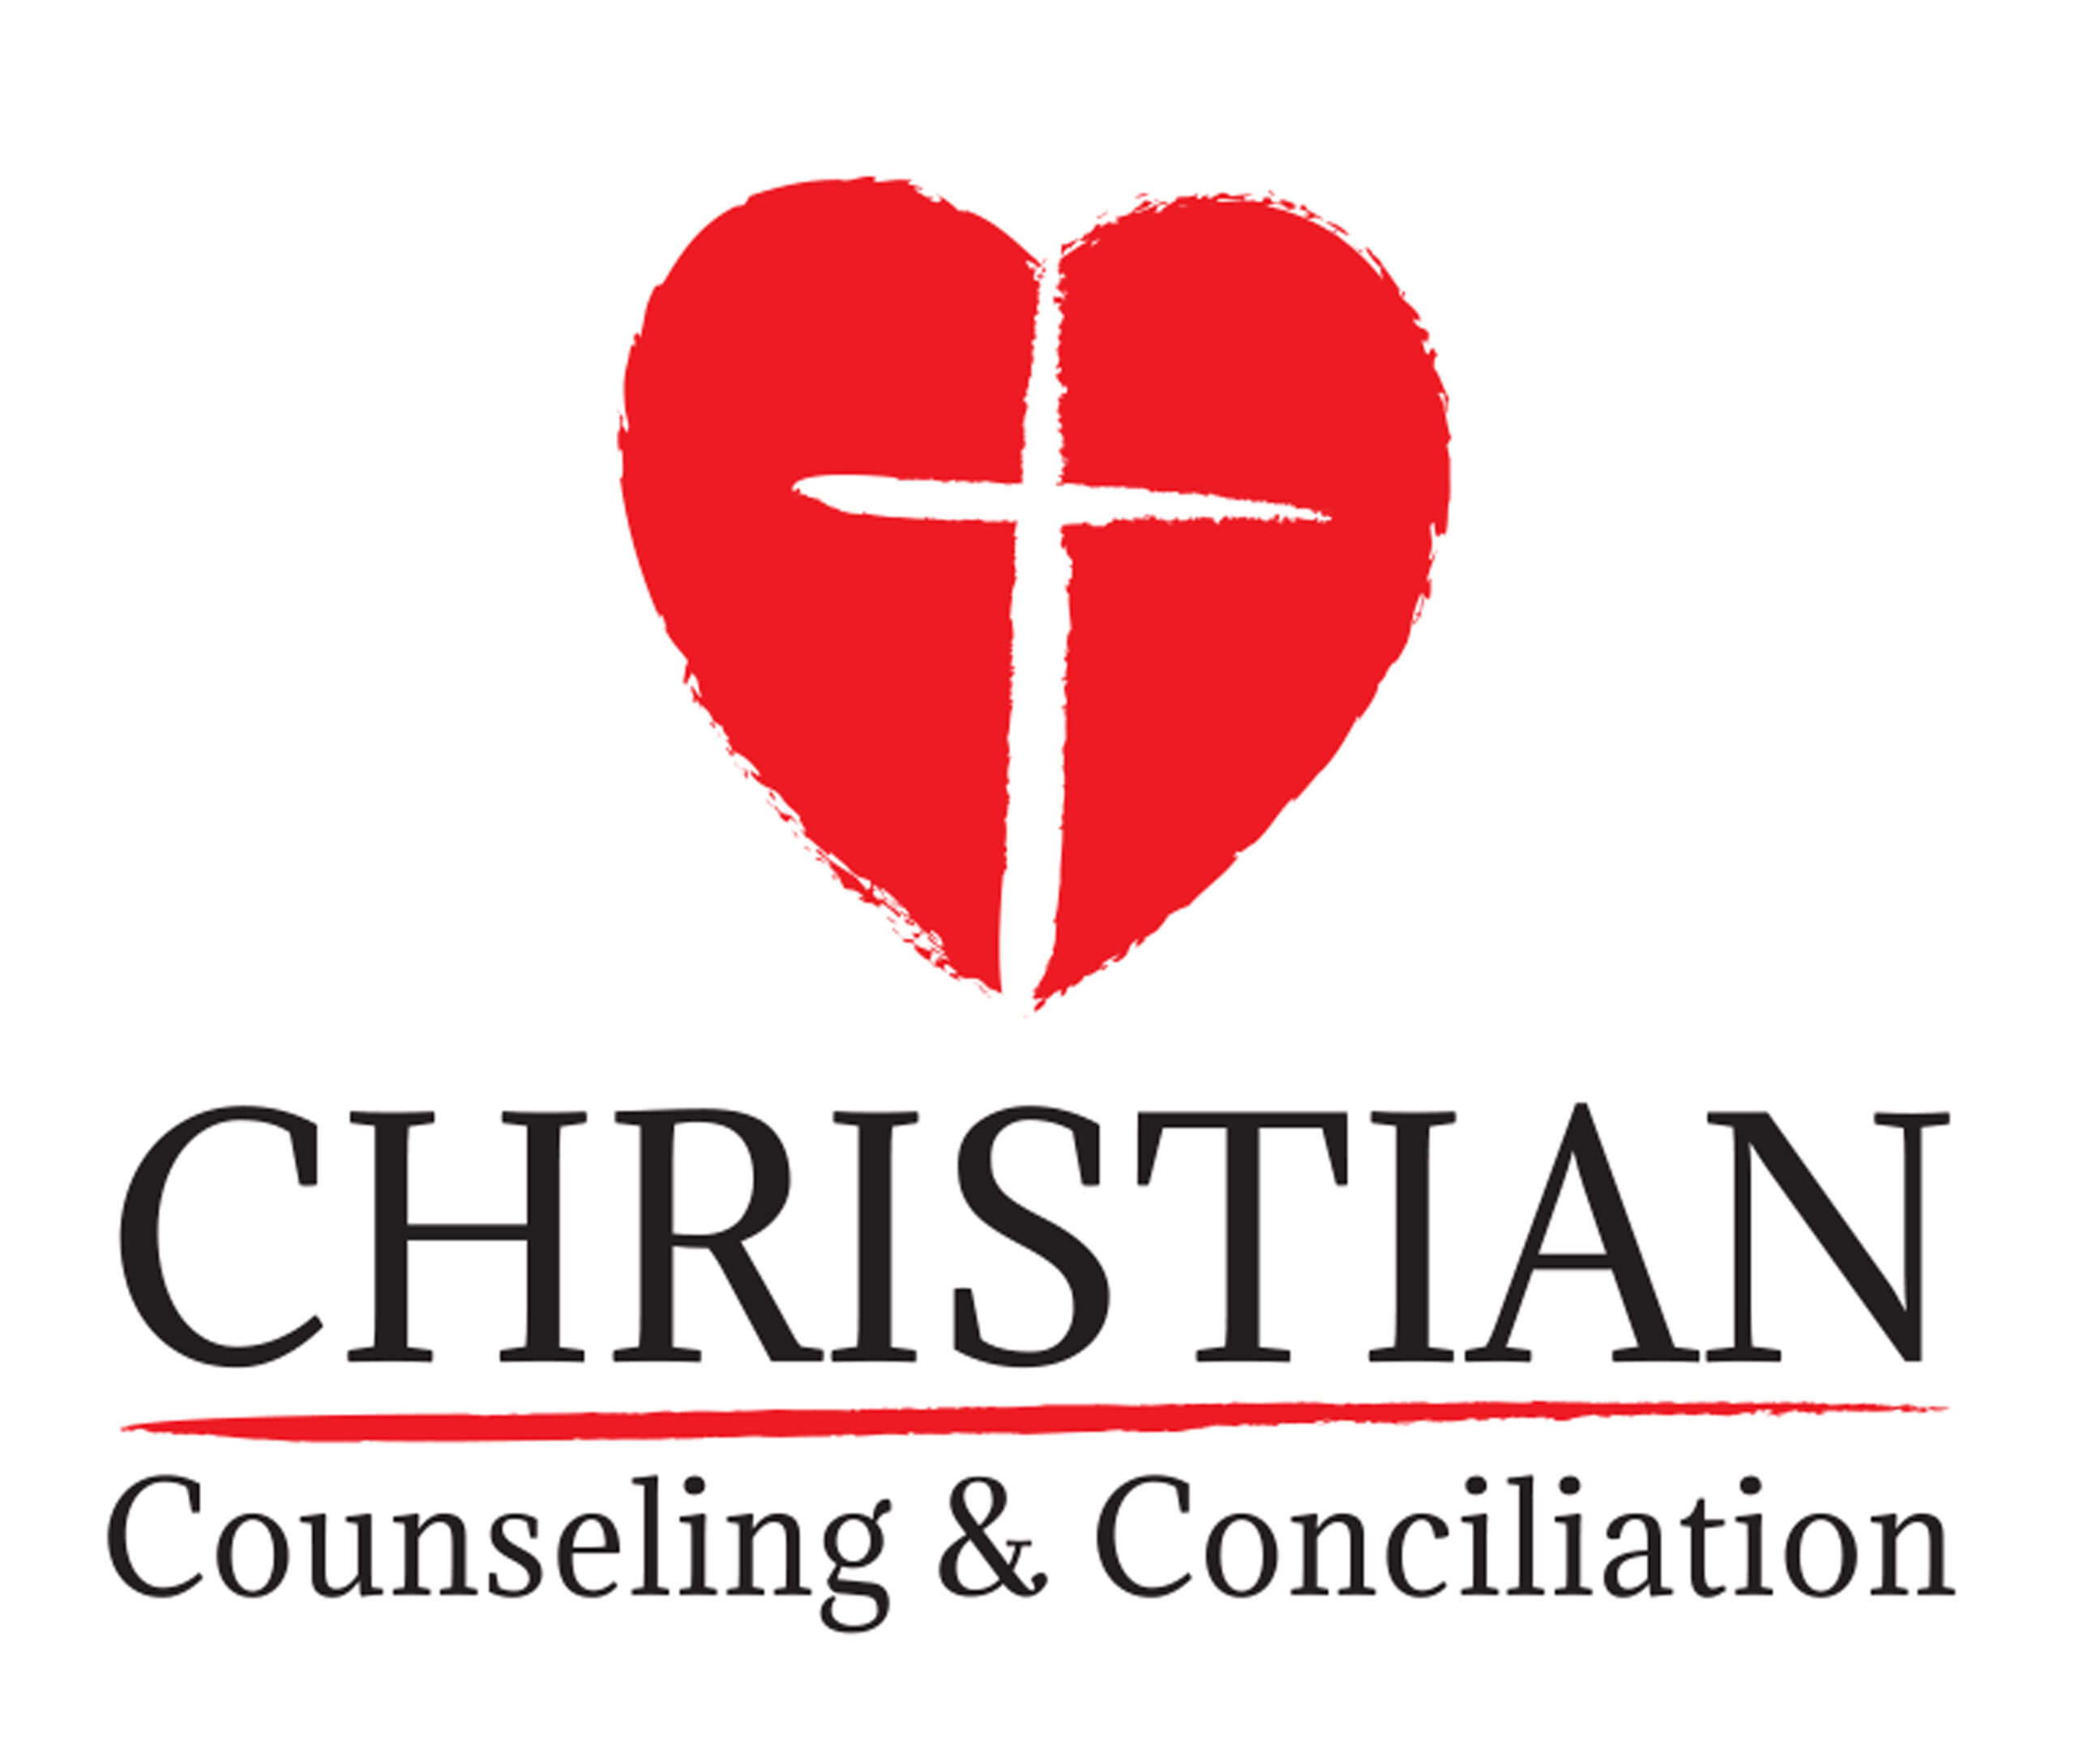 Introducing: Christian Counseling & Conciliation